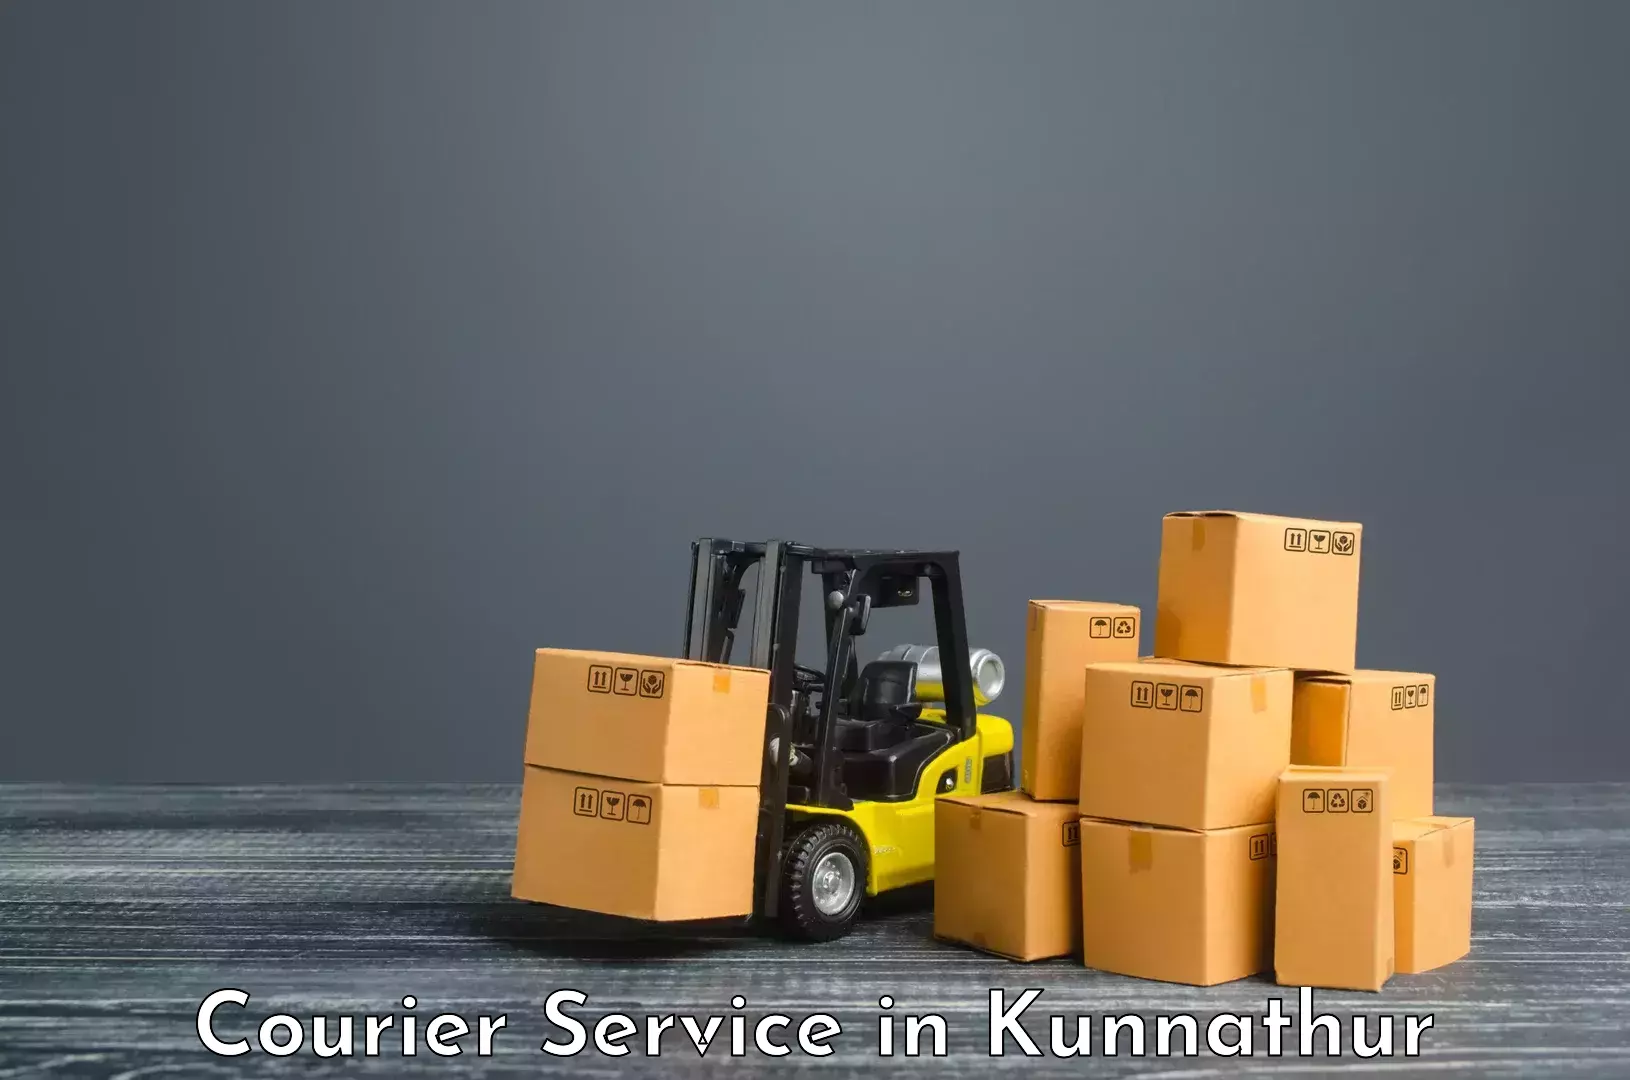 Specialized courier services in Kunnathur